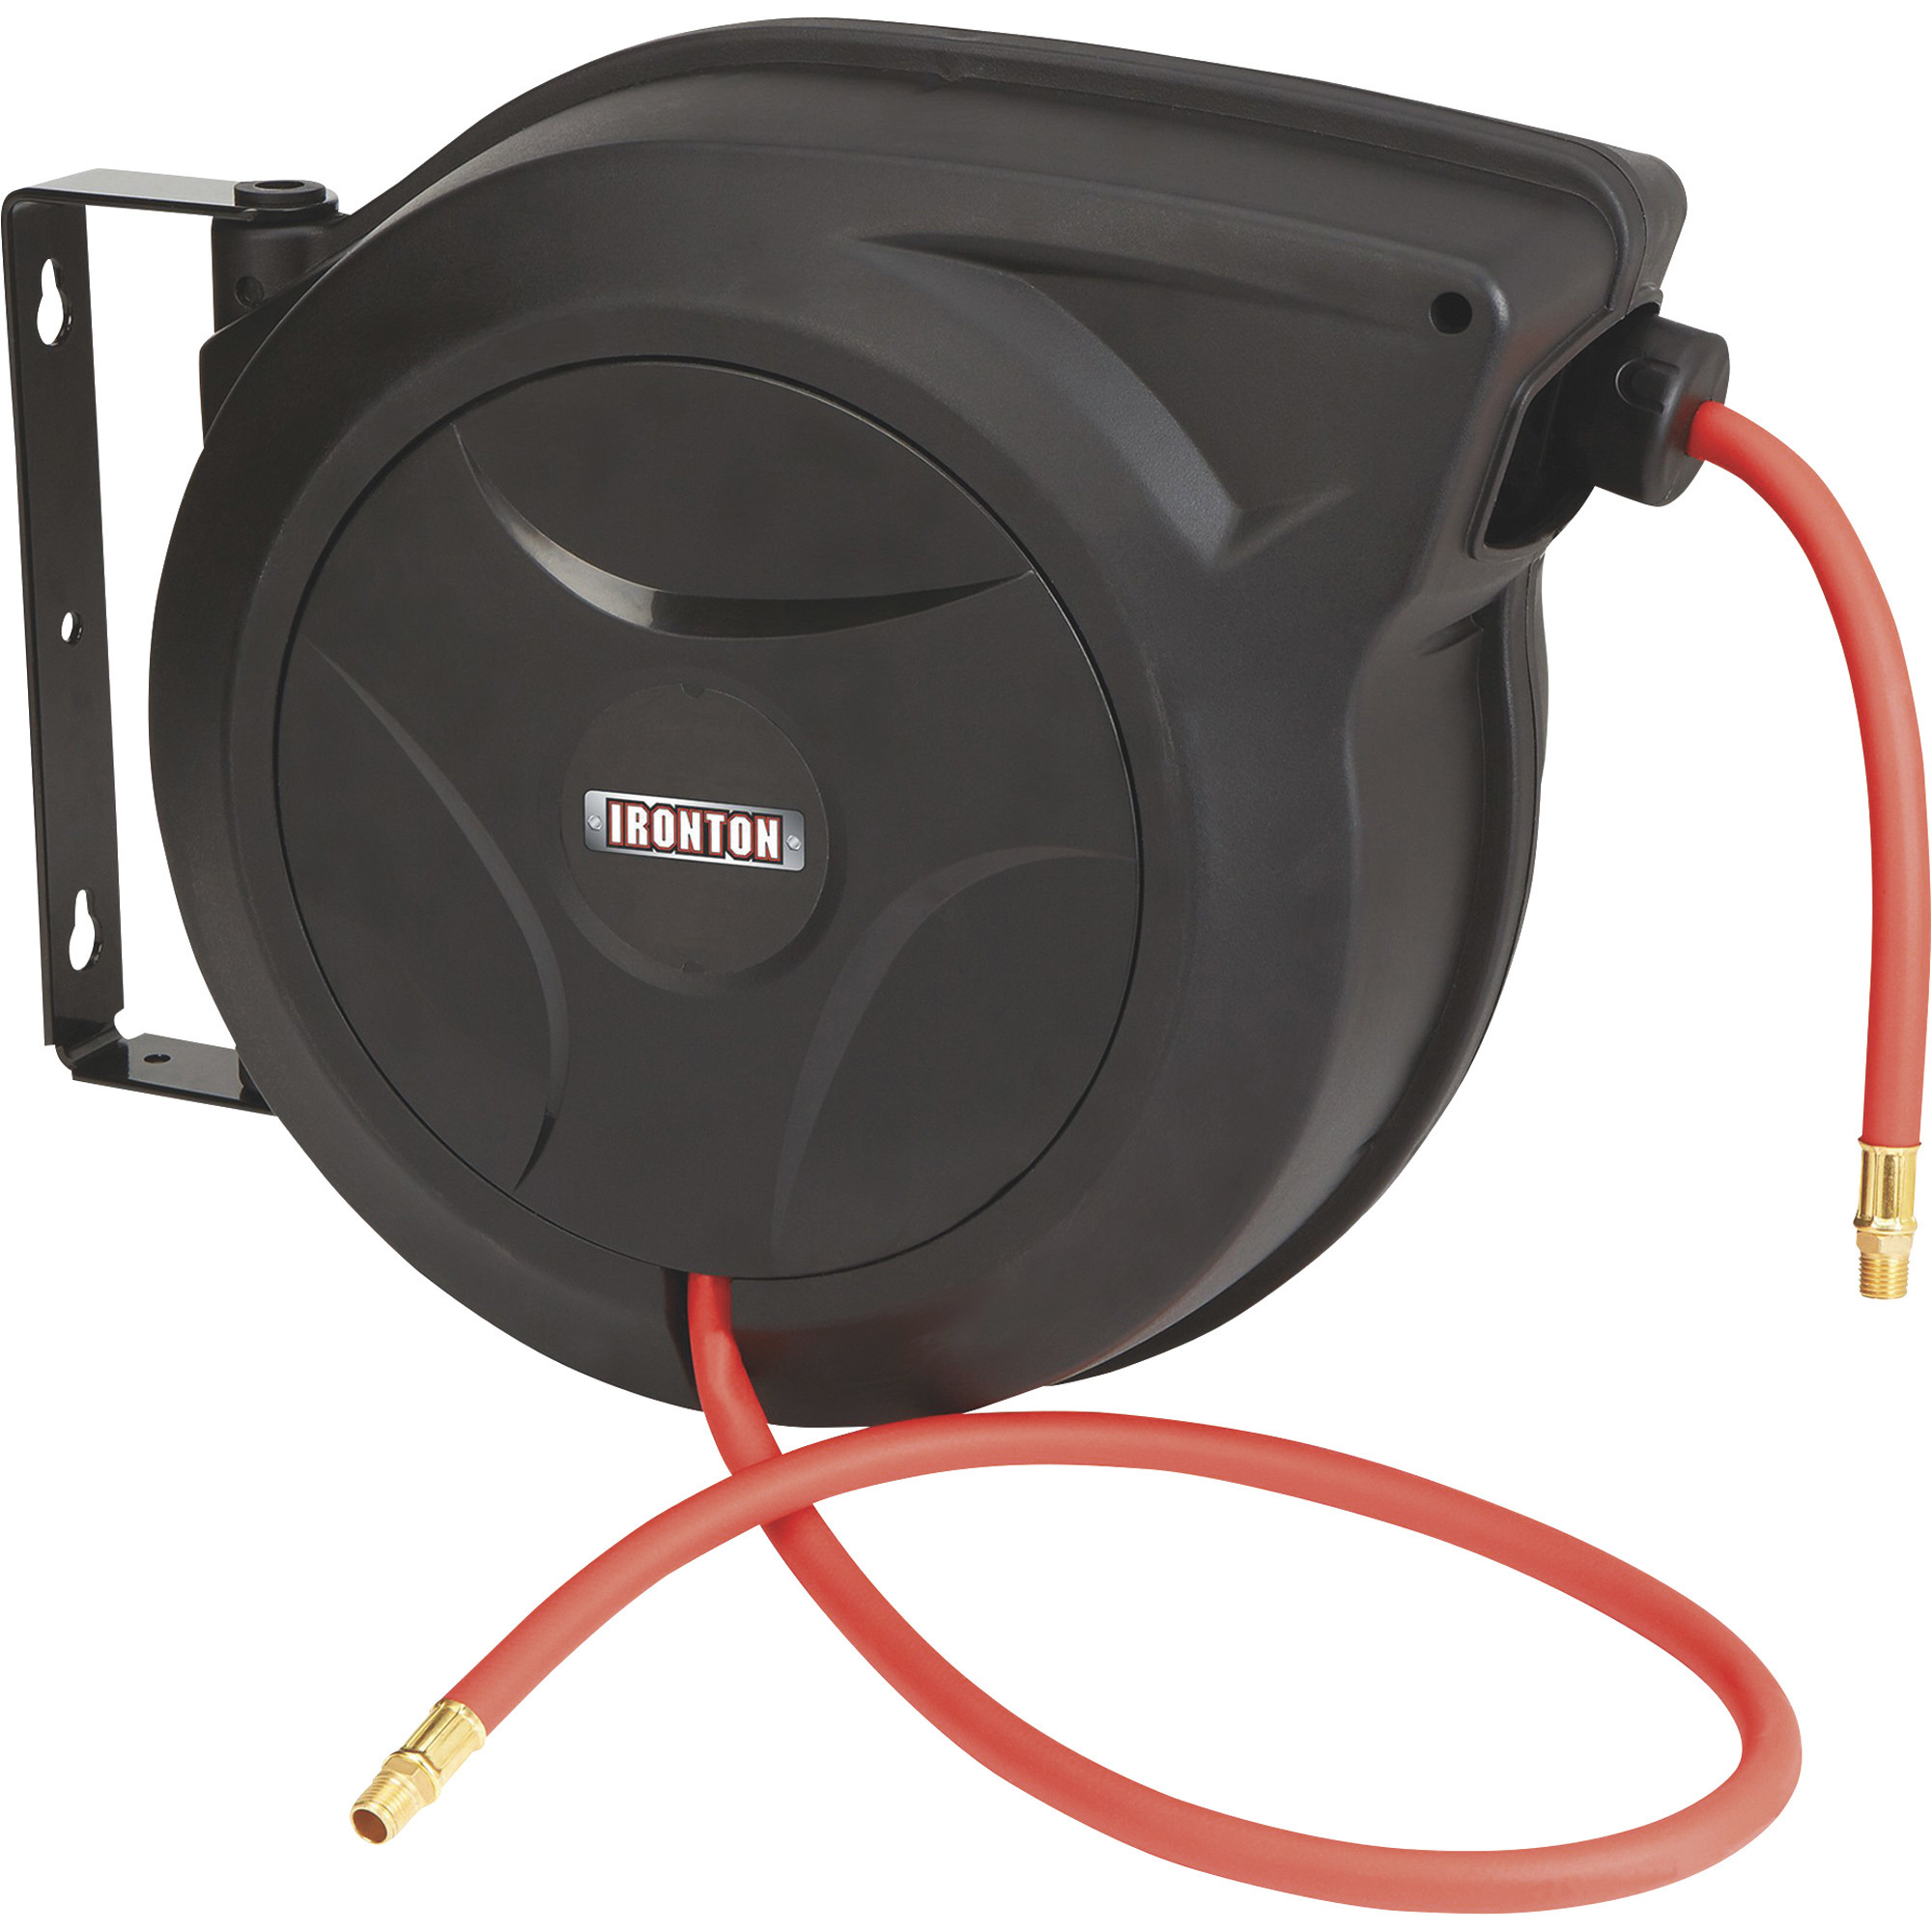 Ironton Retractable Auto-Return Hose Reel with 3/8in. x 50ft